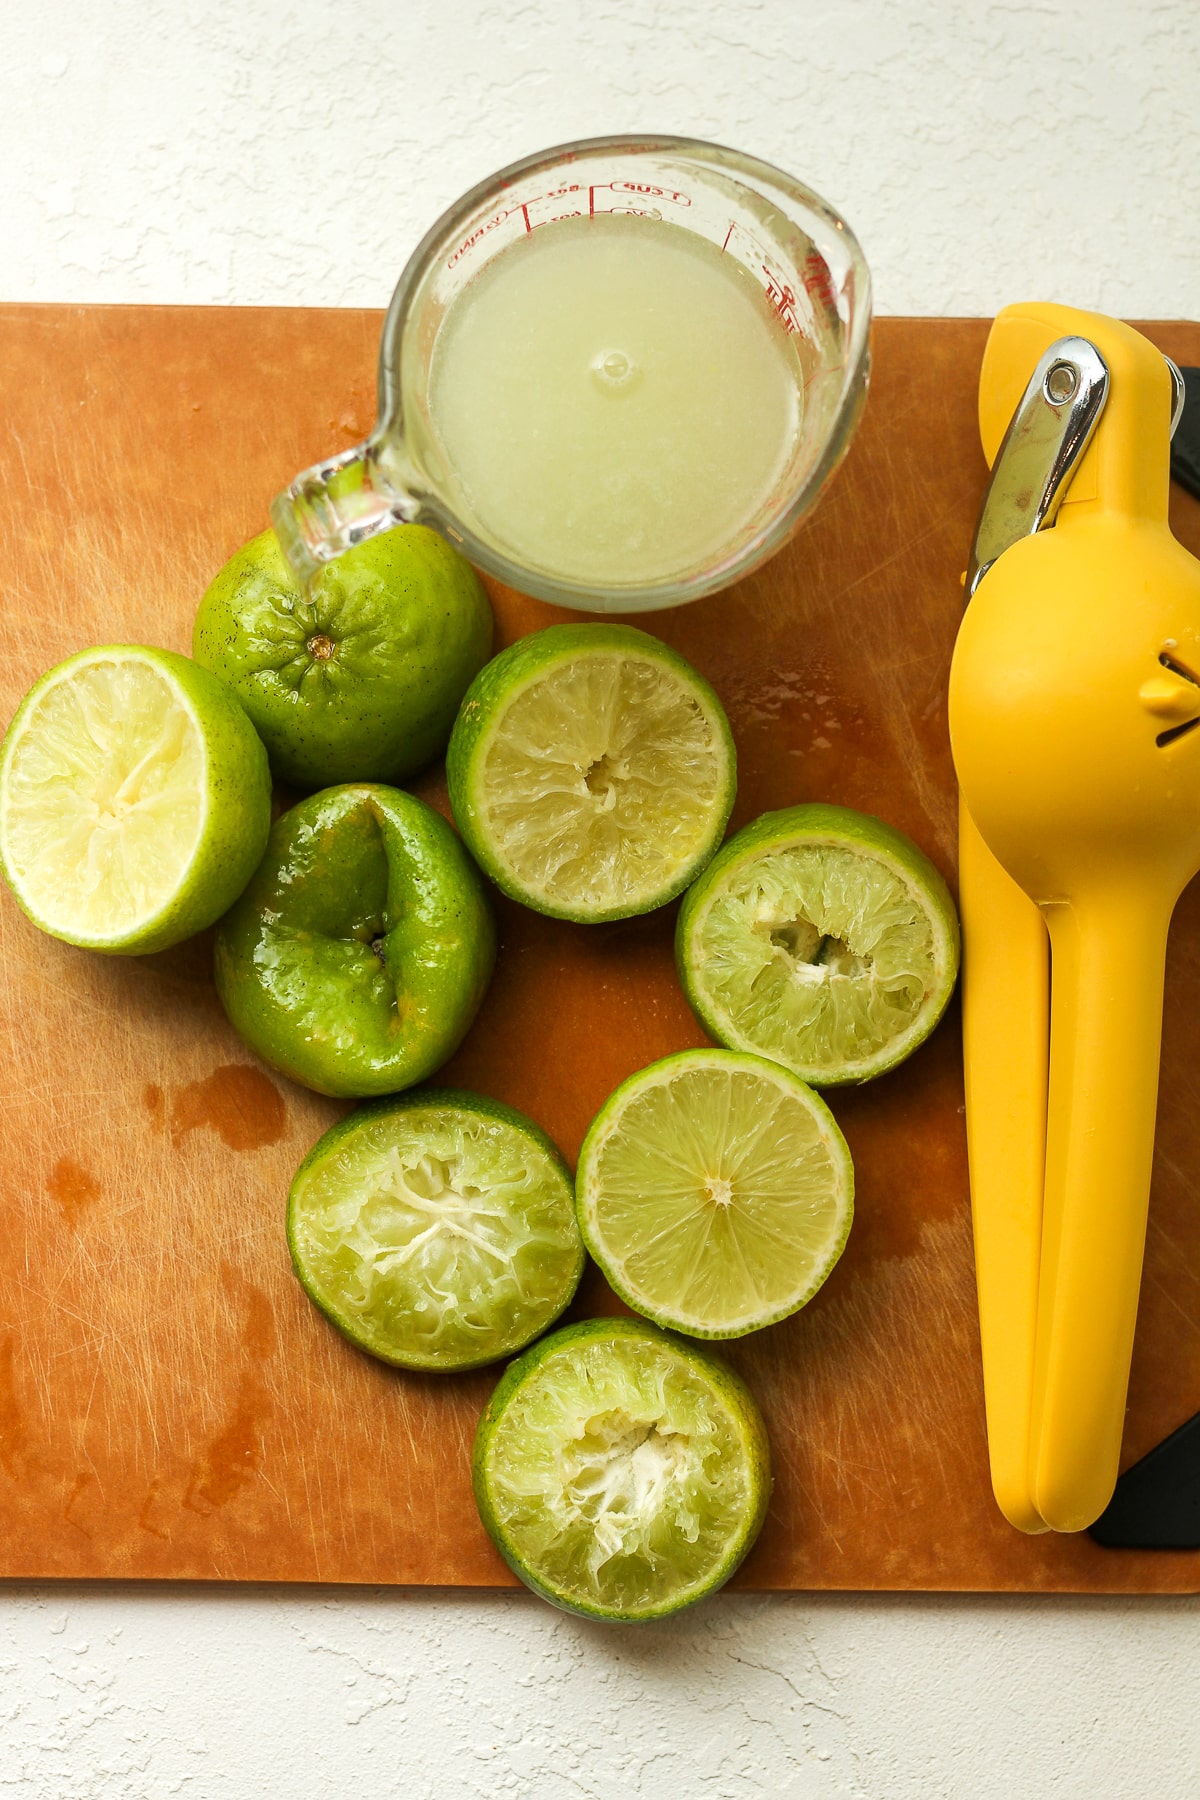 Overhead view of halved, squeezed limes with a cup of juice.